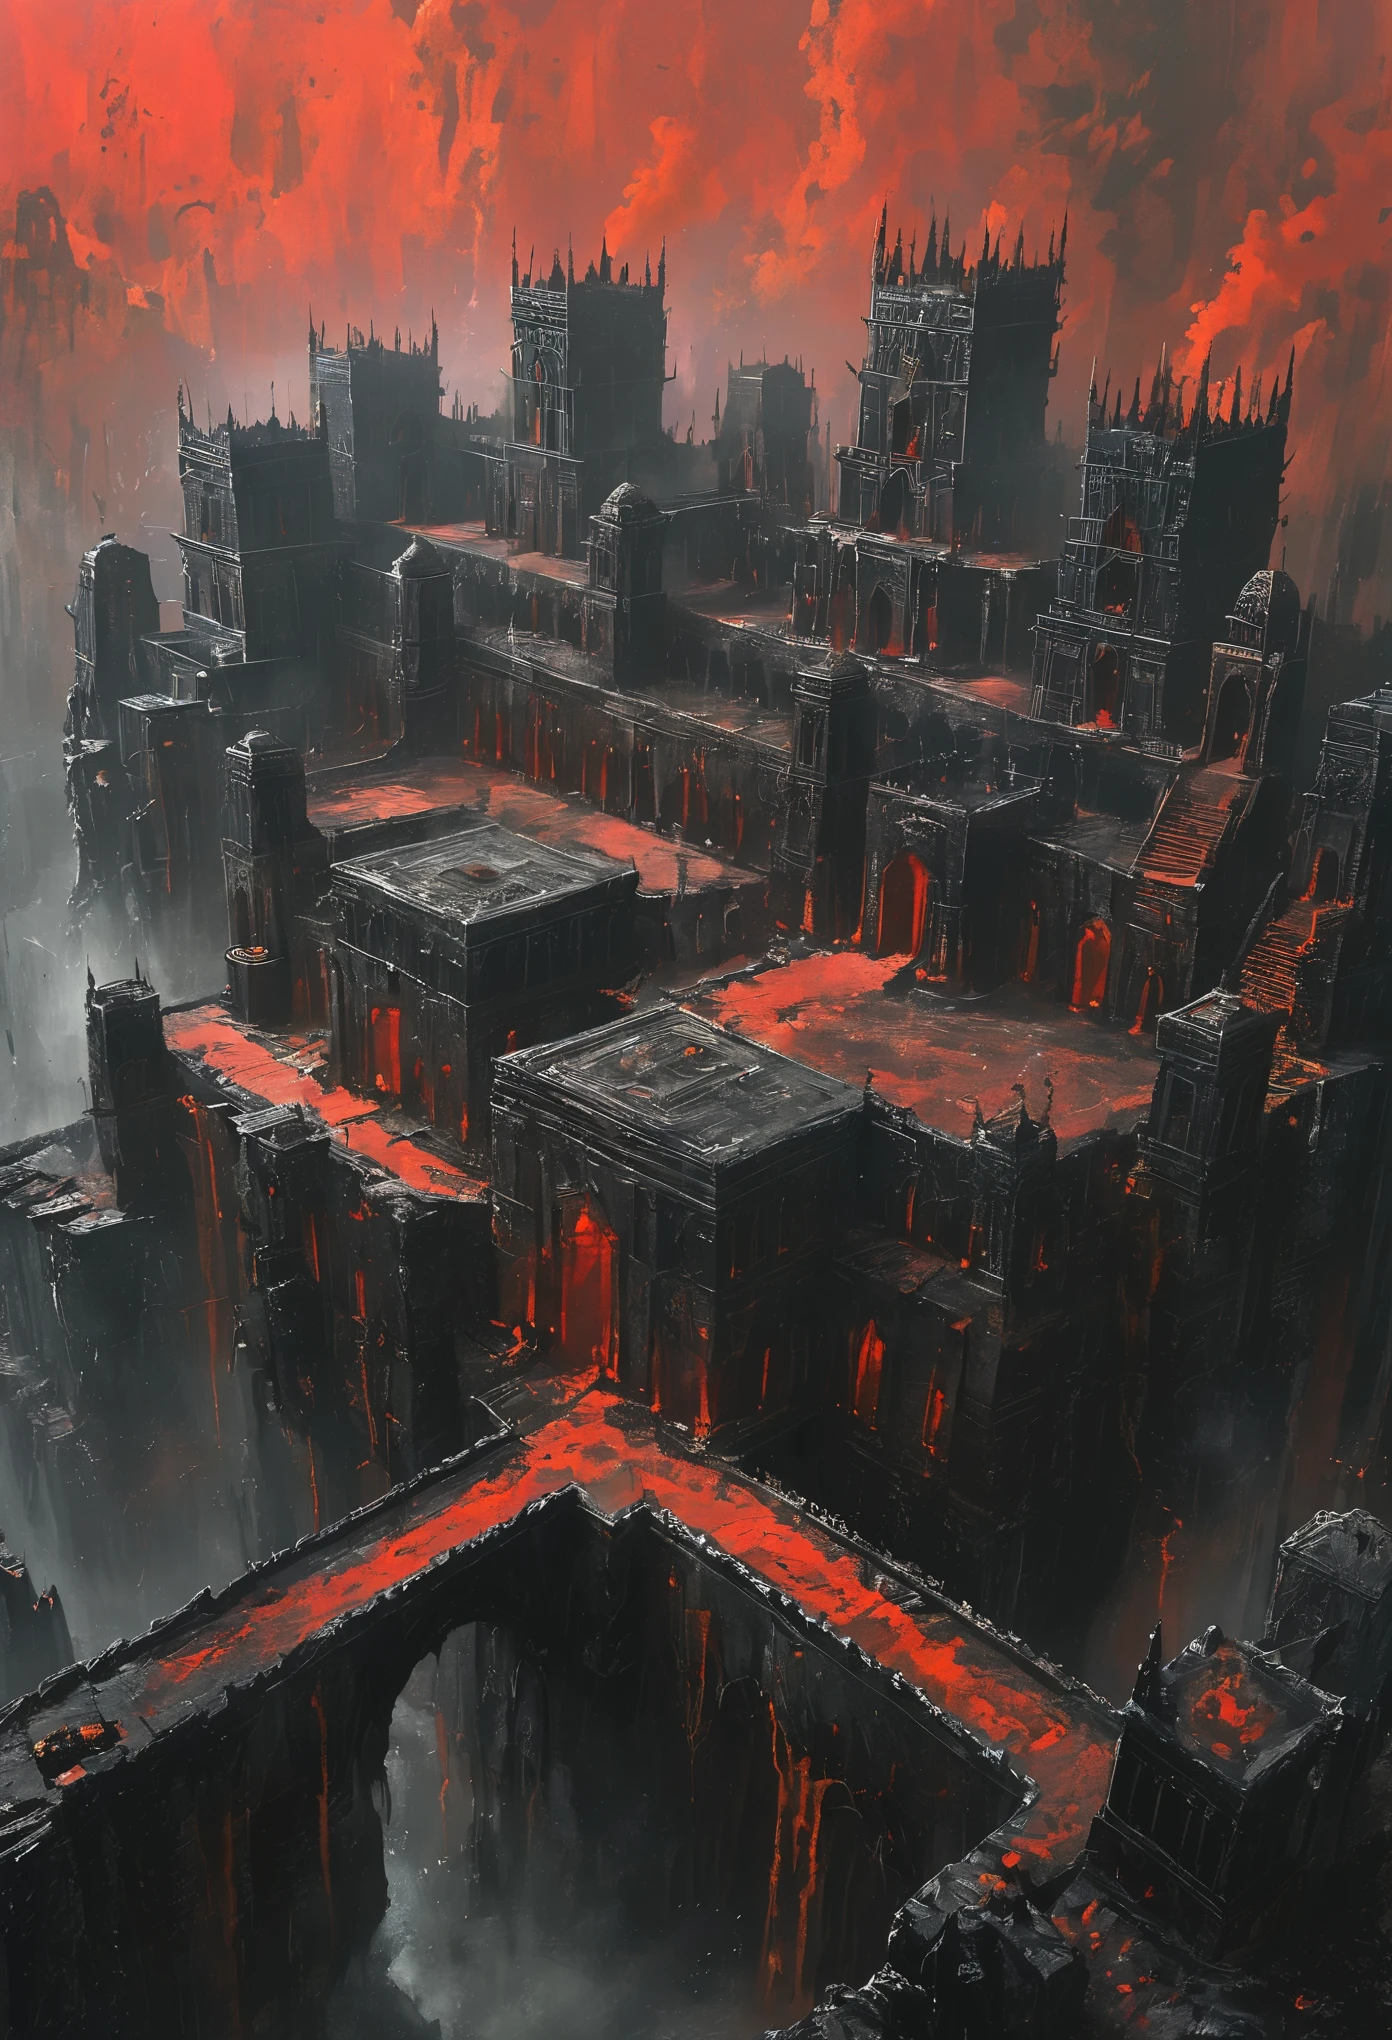 Concept art of an ancient medieval fantasy city built atop the ruins of another. The buildings are made of black stone and red metal, 